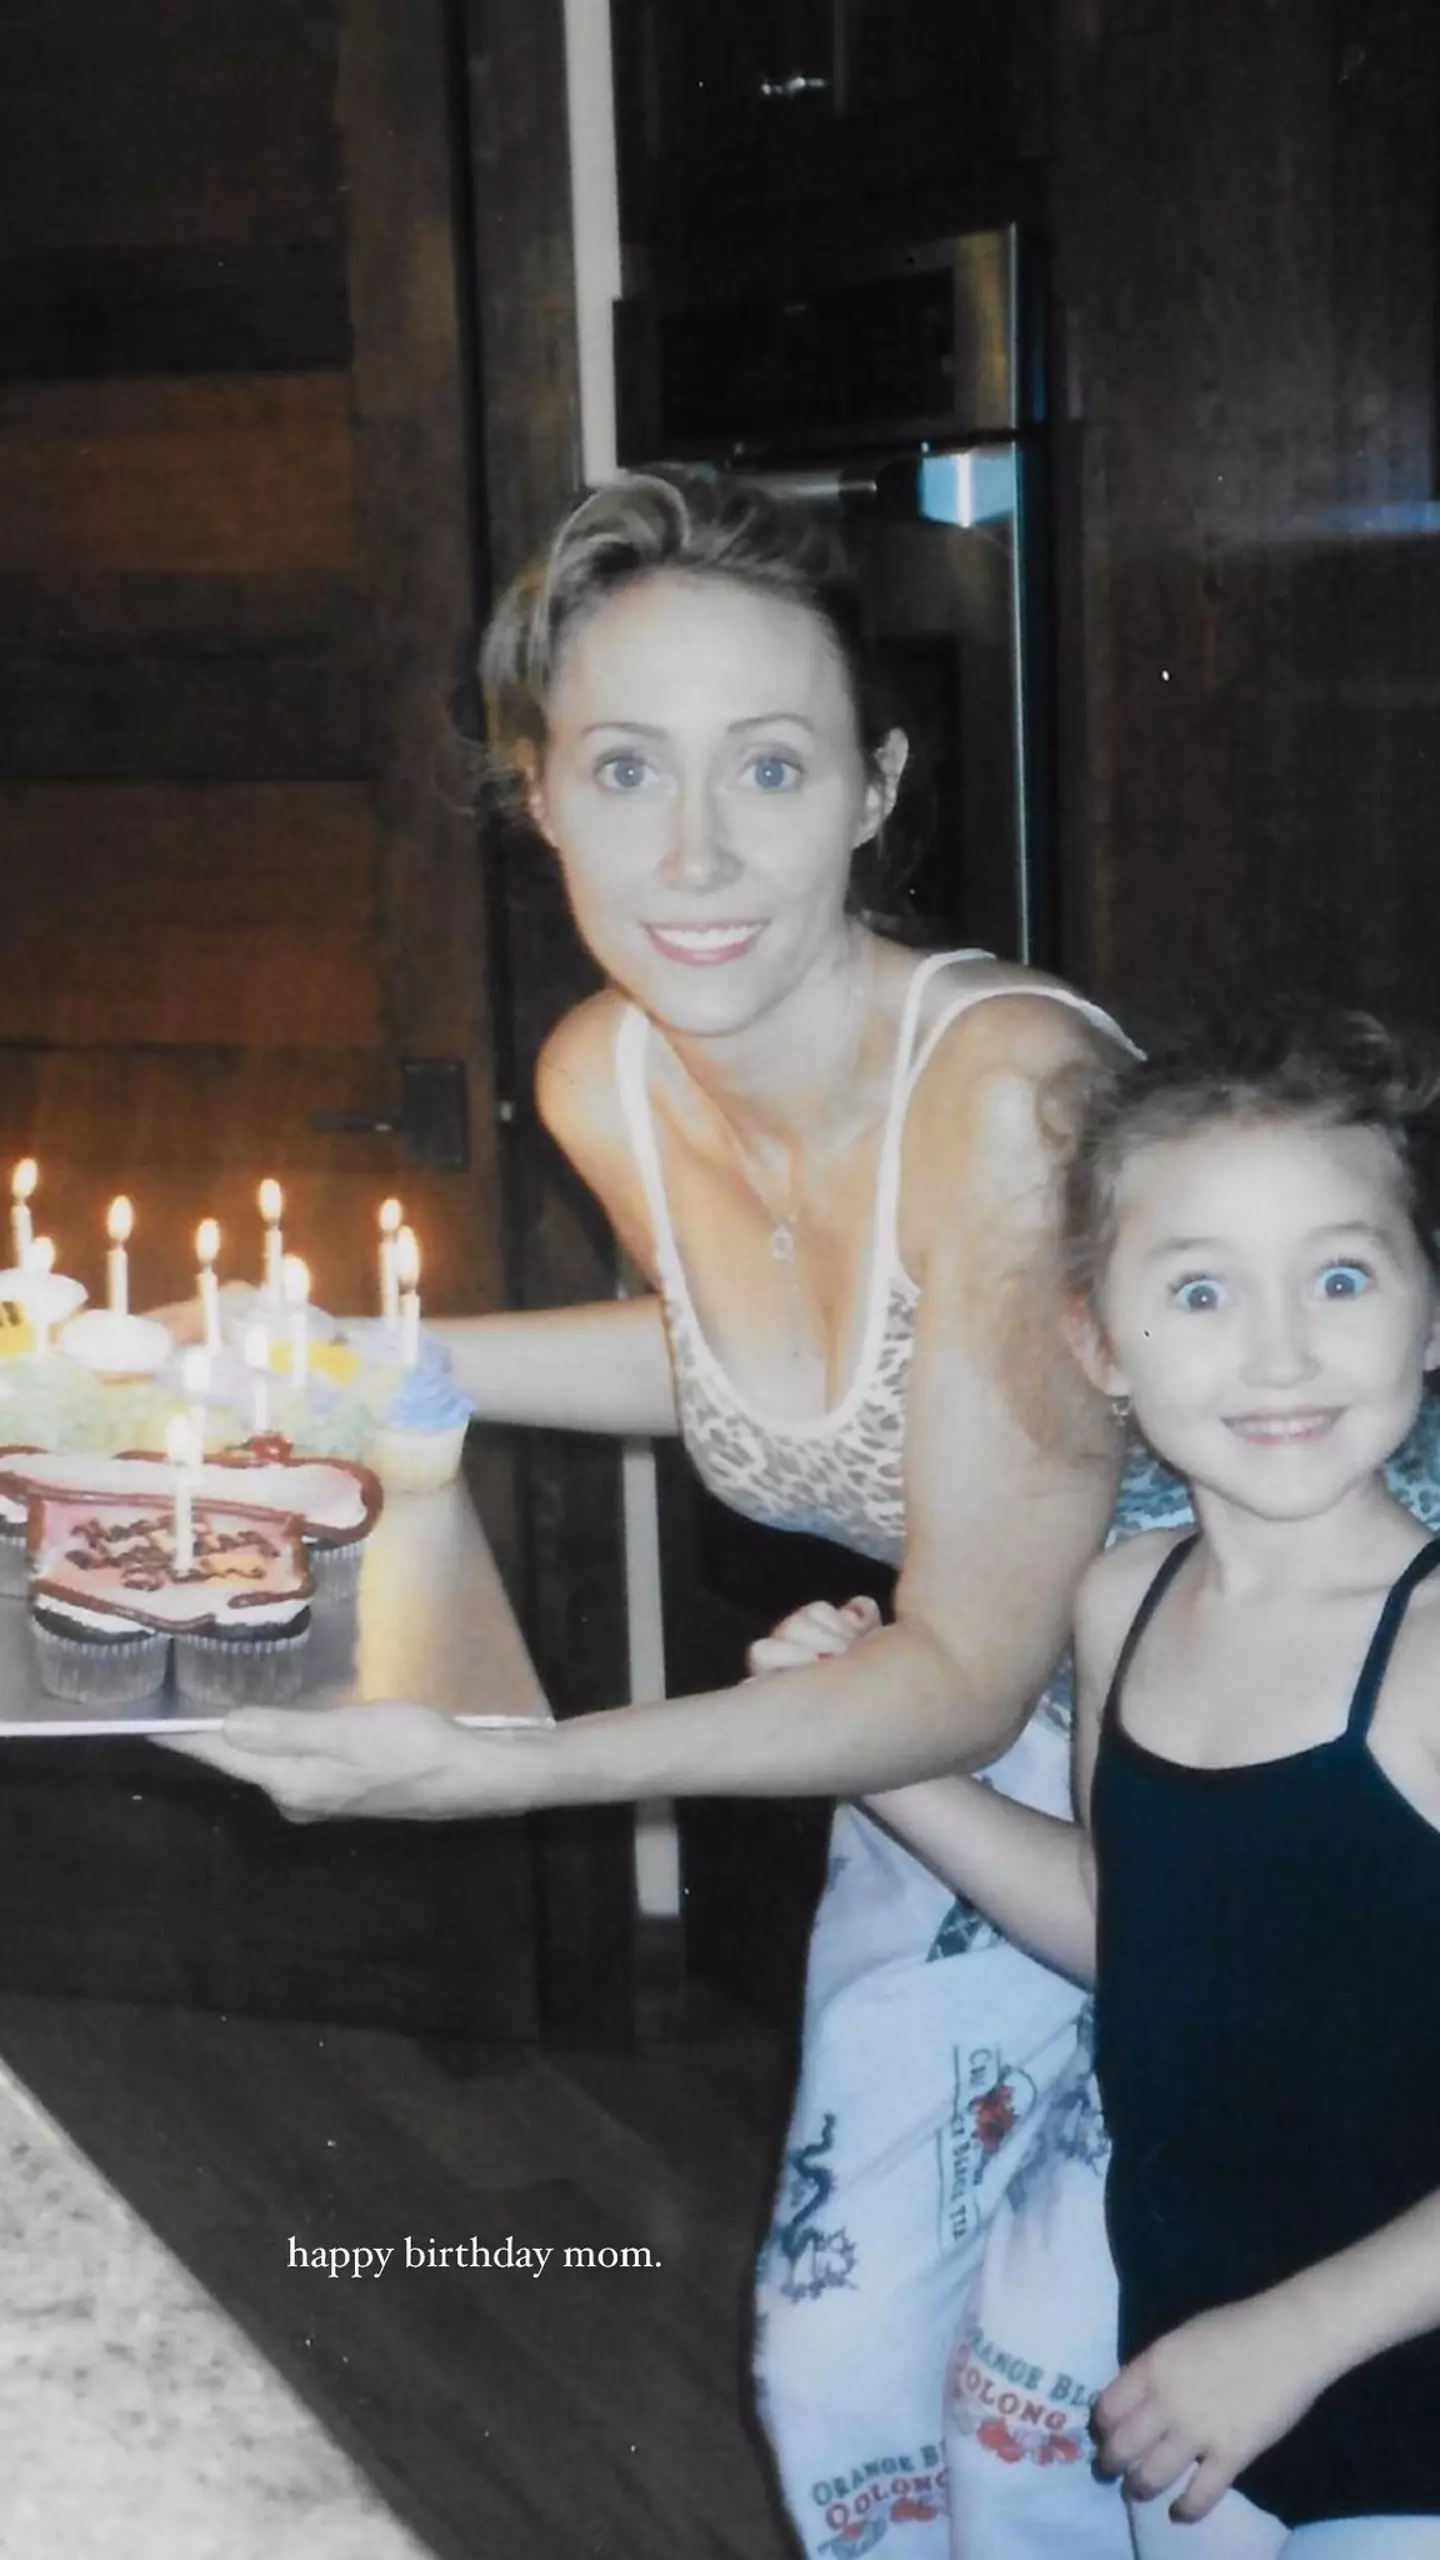 Noah Cyrus paid tribute to her mom on her birthday. (Instagram/@noahcyrus)